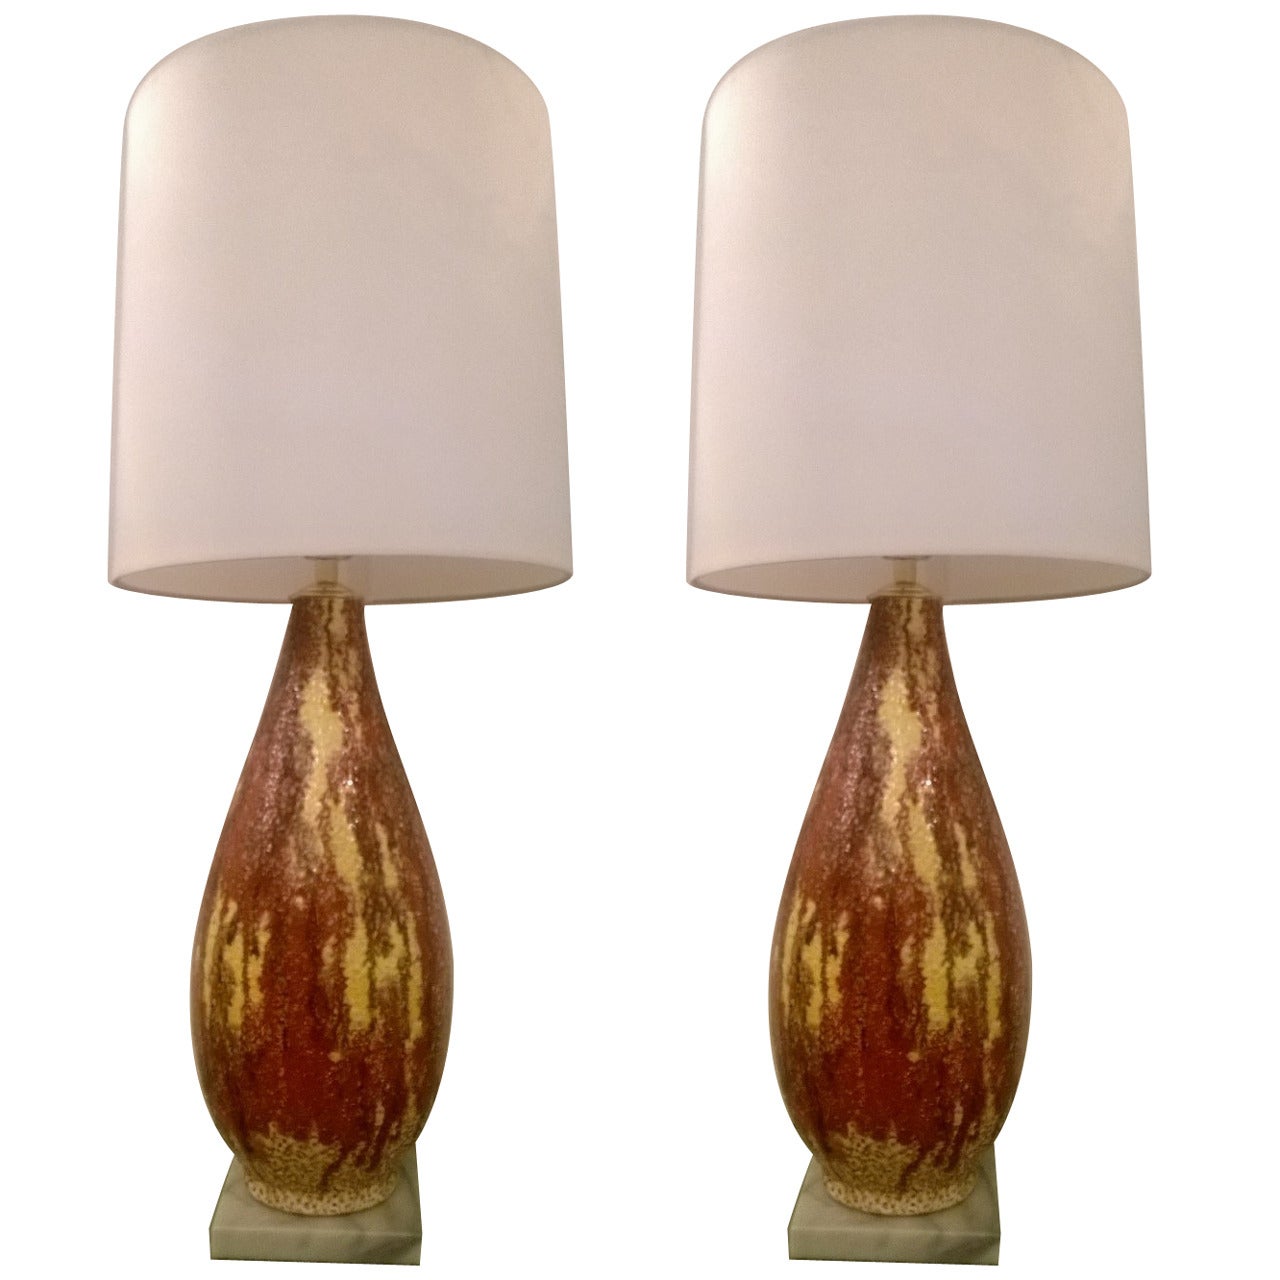 Pair of Italian 1950s Art Pottery Lamps For Sale